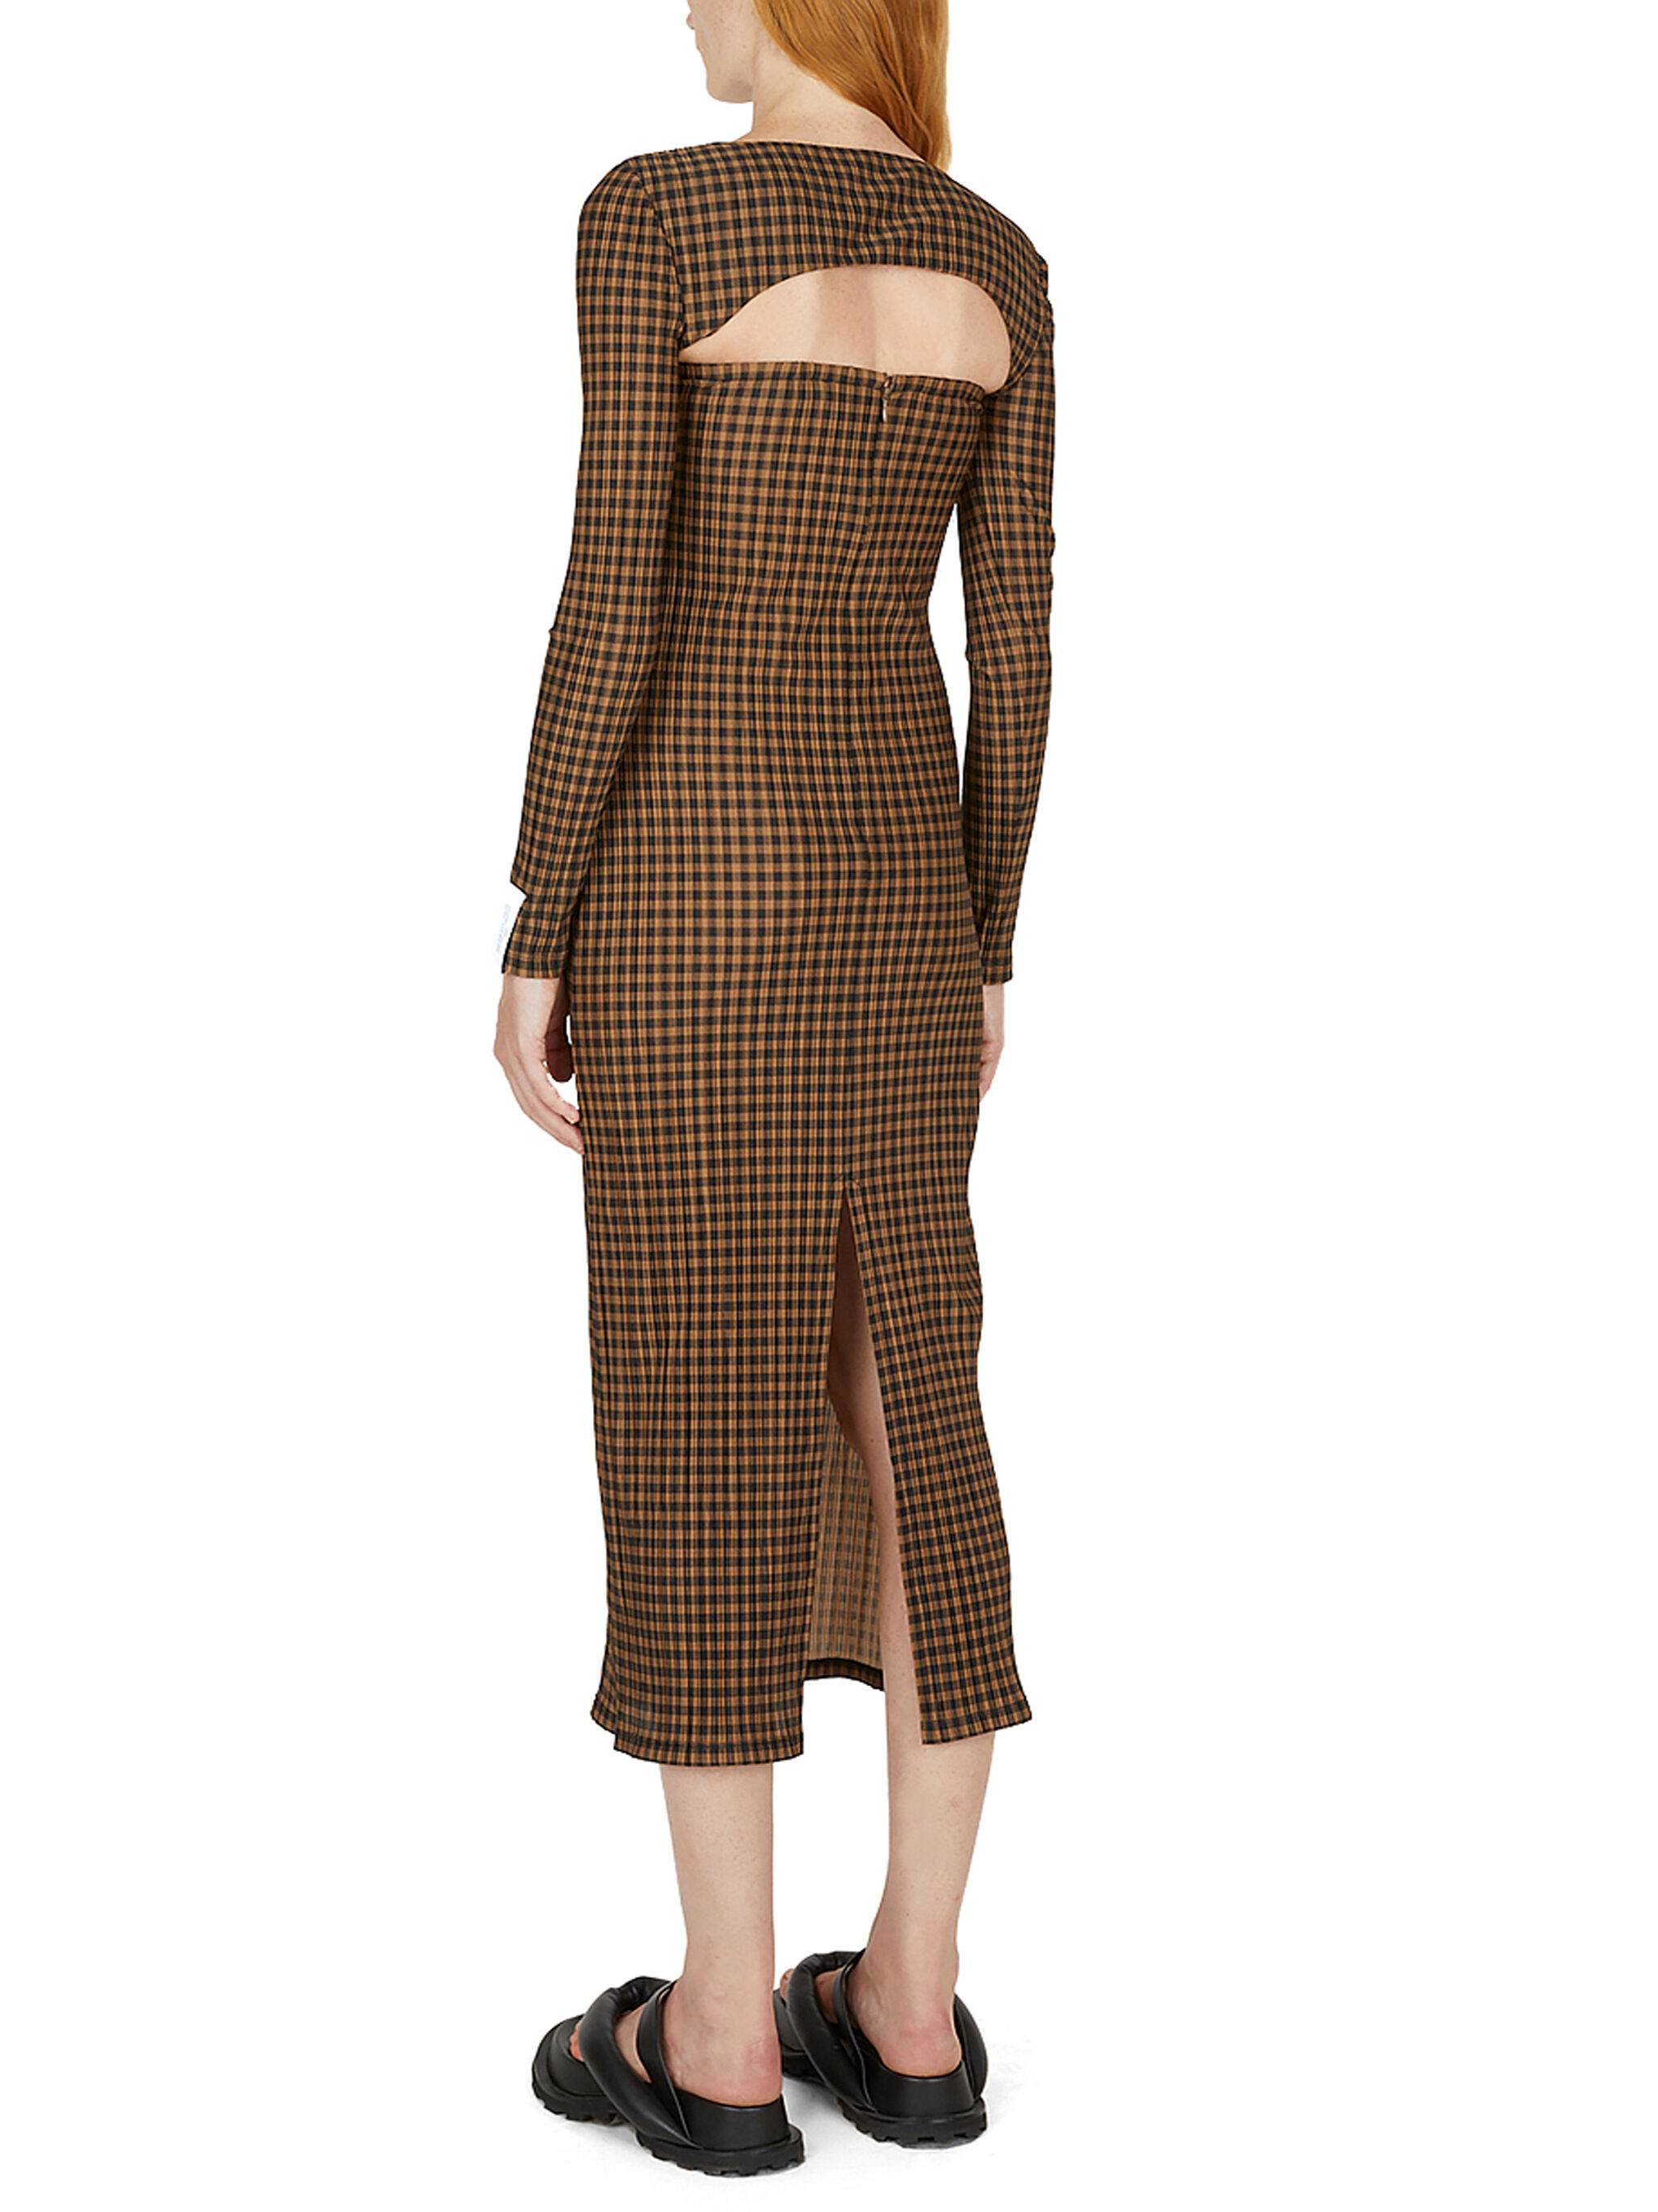 ROKH Check Dress with Detachable Sleeves